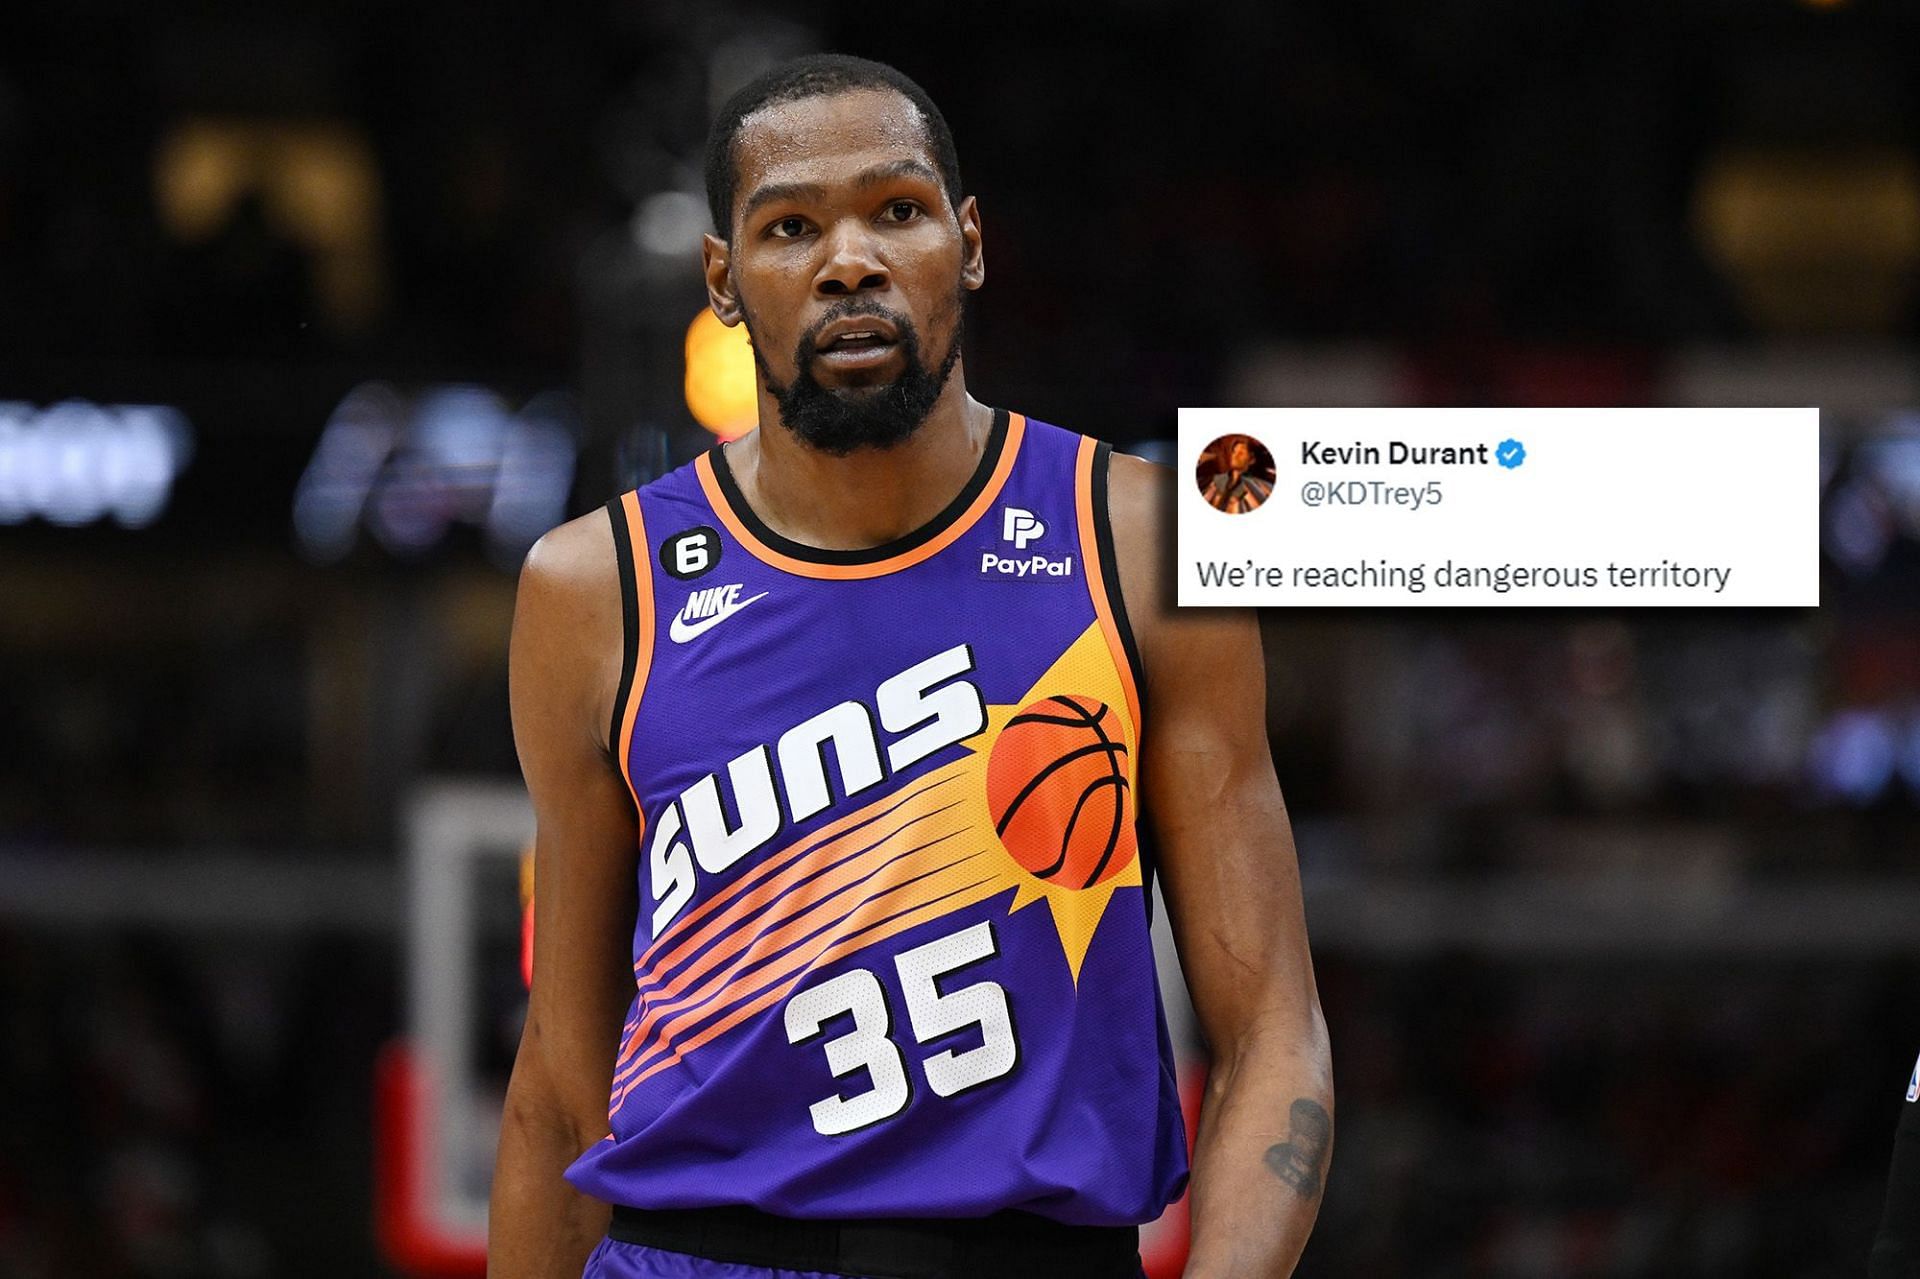 Kevin Durant responds to a viral fake tweet